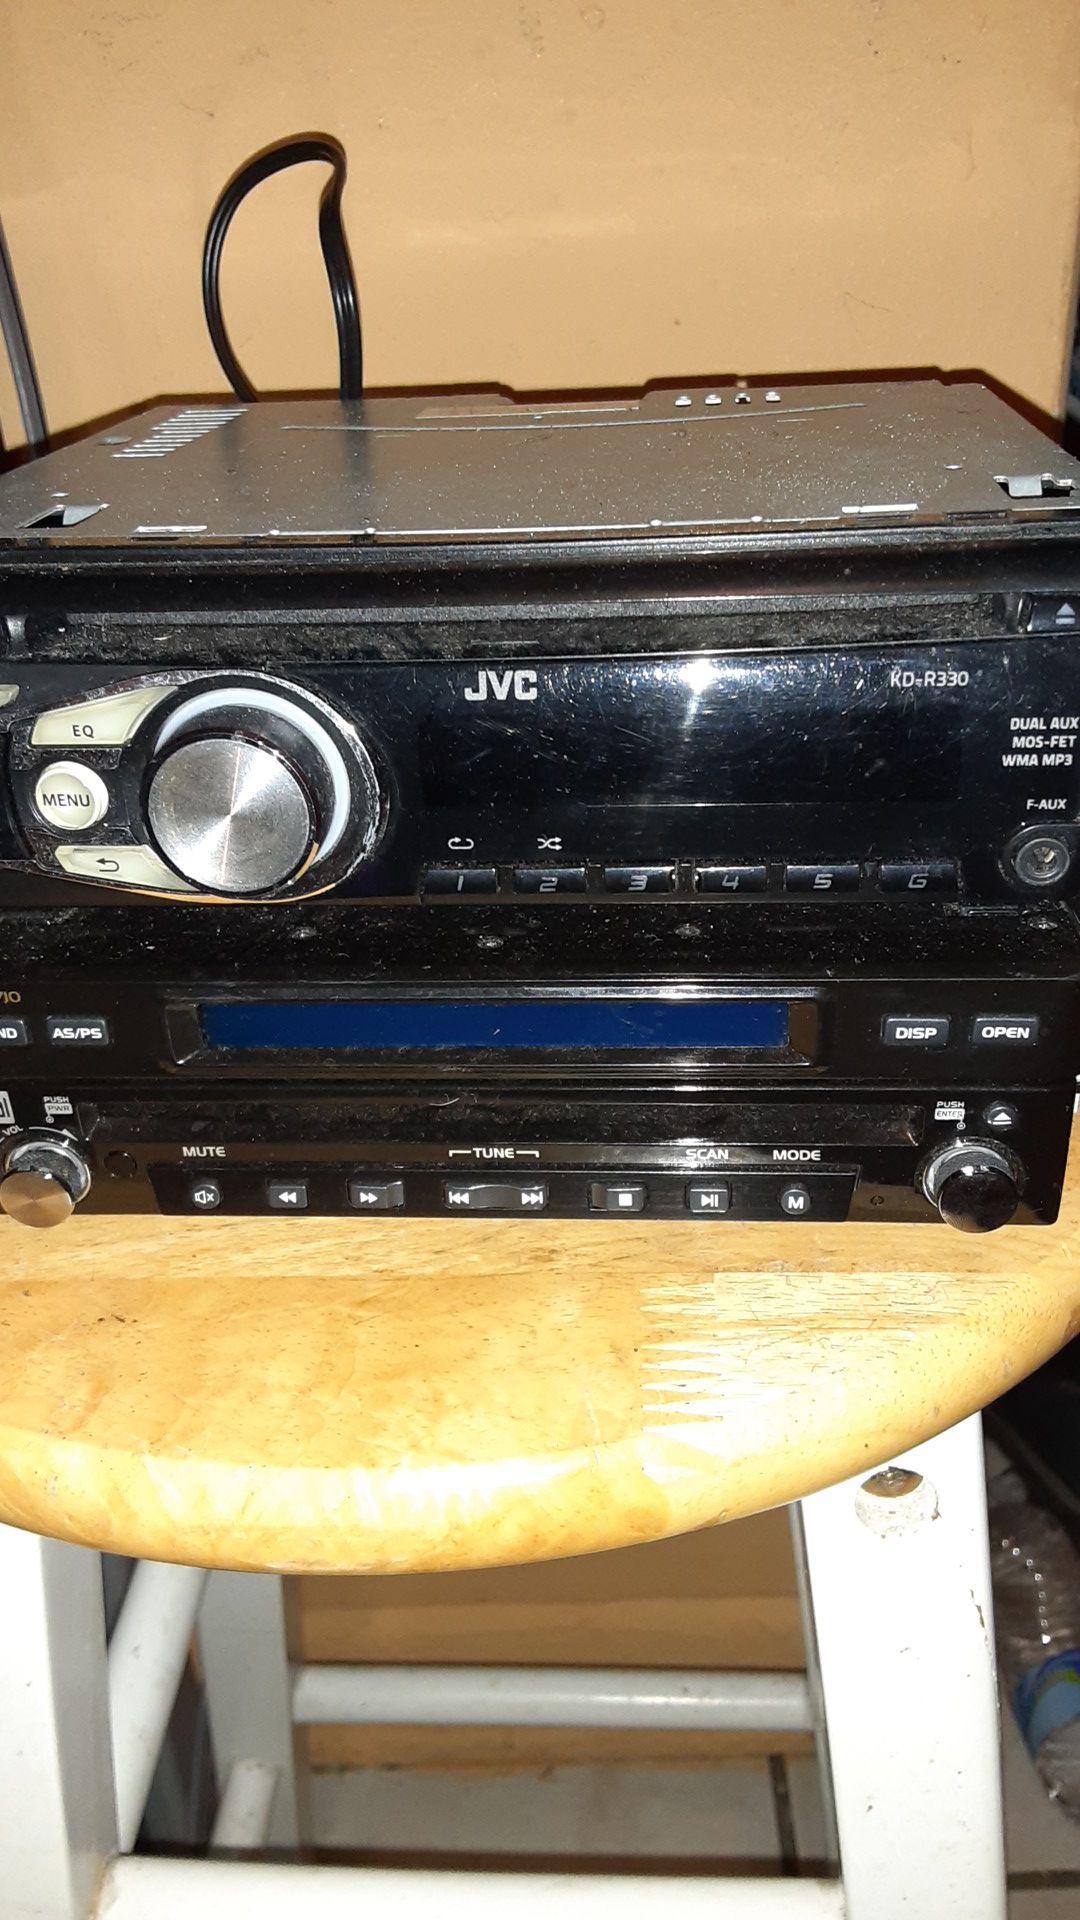 CD player and DVD player